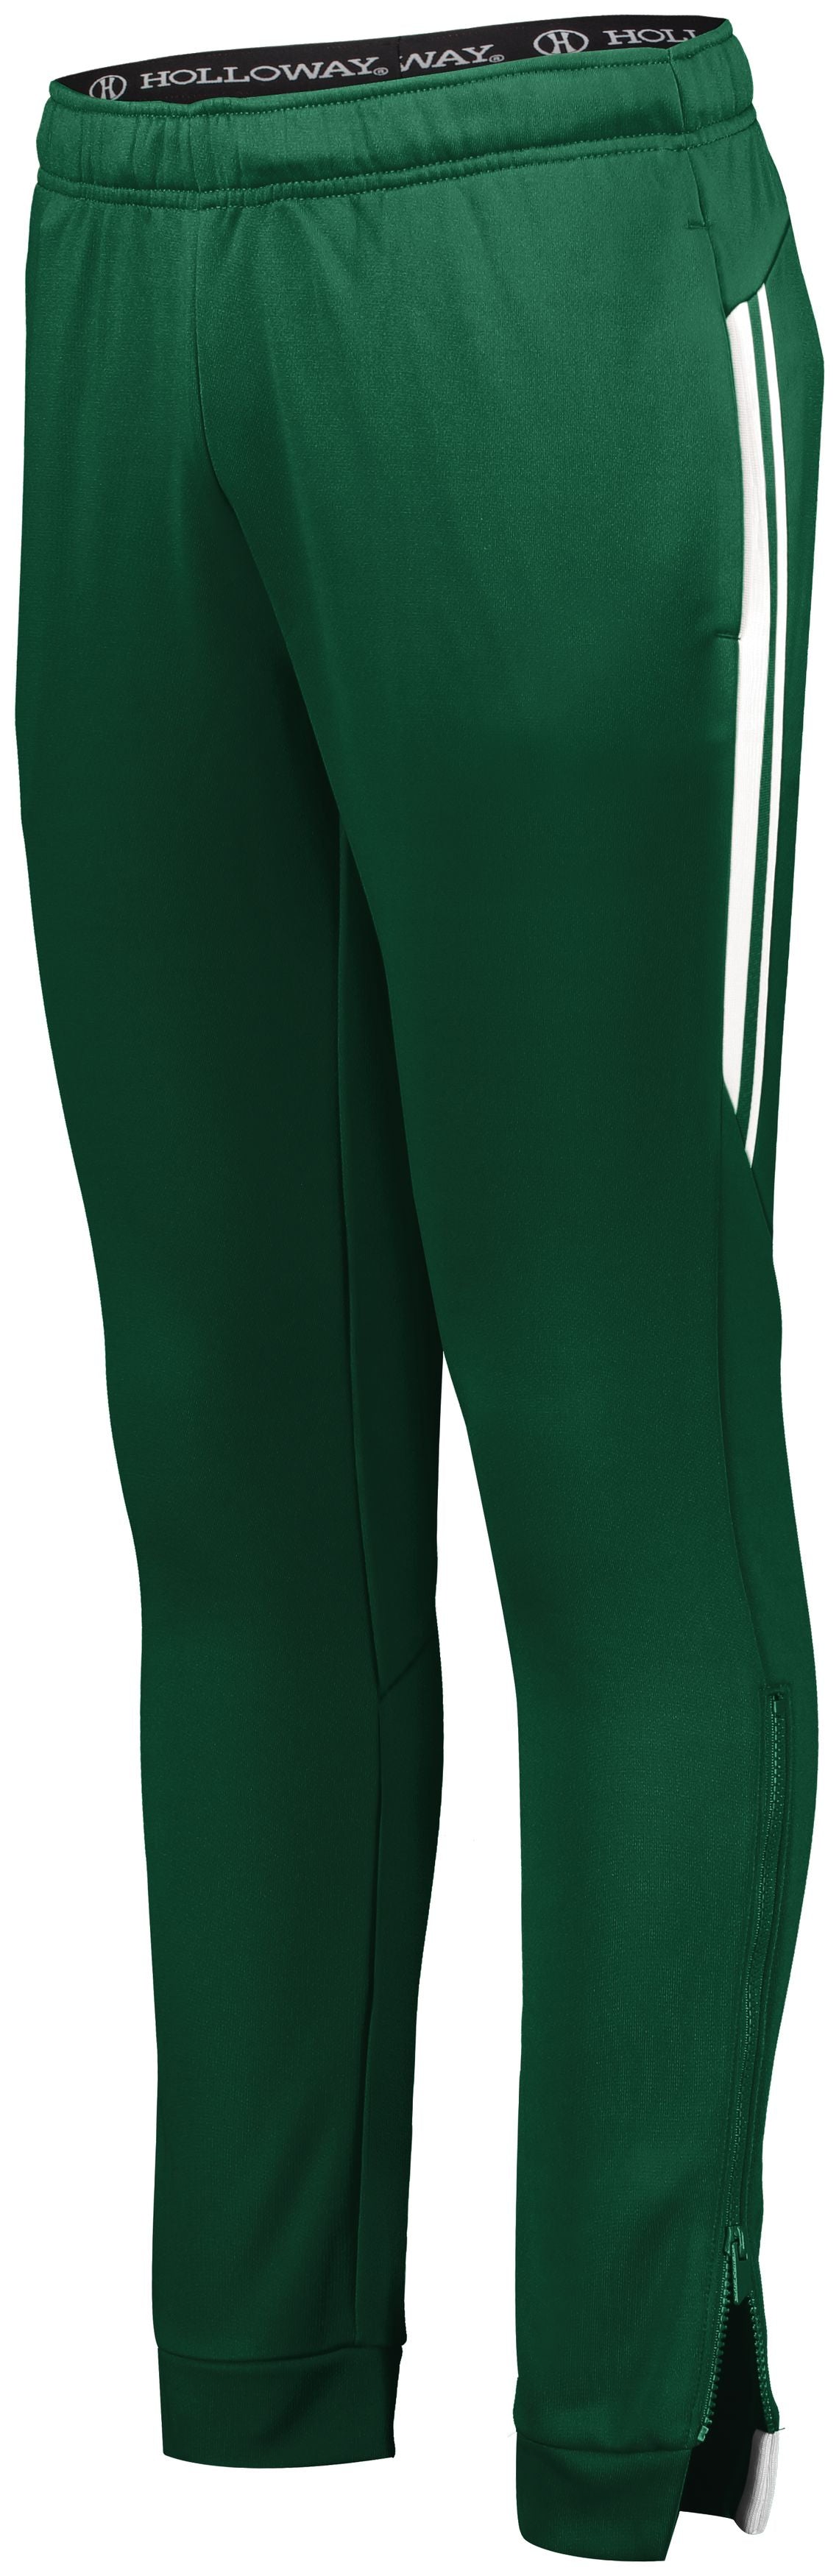 Holloway Ladies Retro Grade Pant in Forest/White  -Part of the Ladies, Ladies-Pants, Pants, Holloway product lines at KanaleyCreations.com